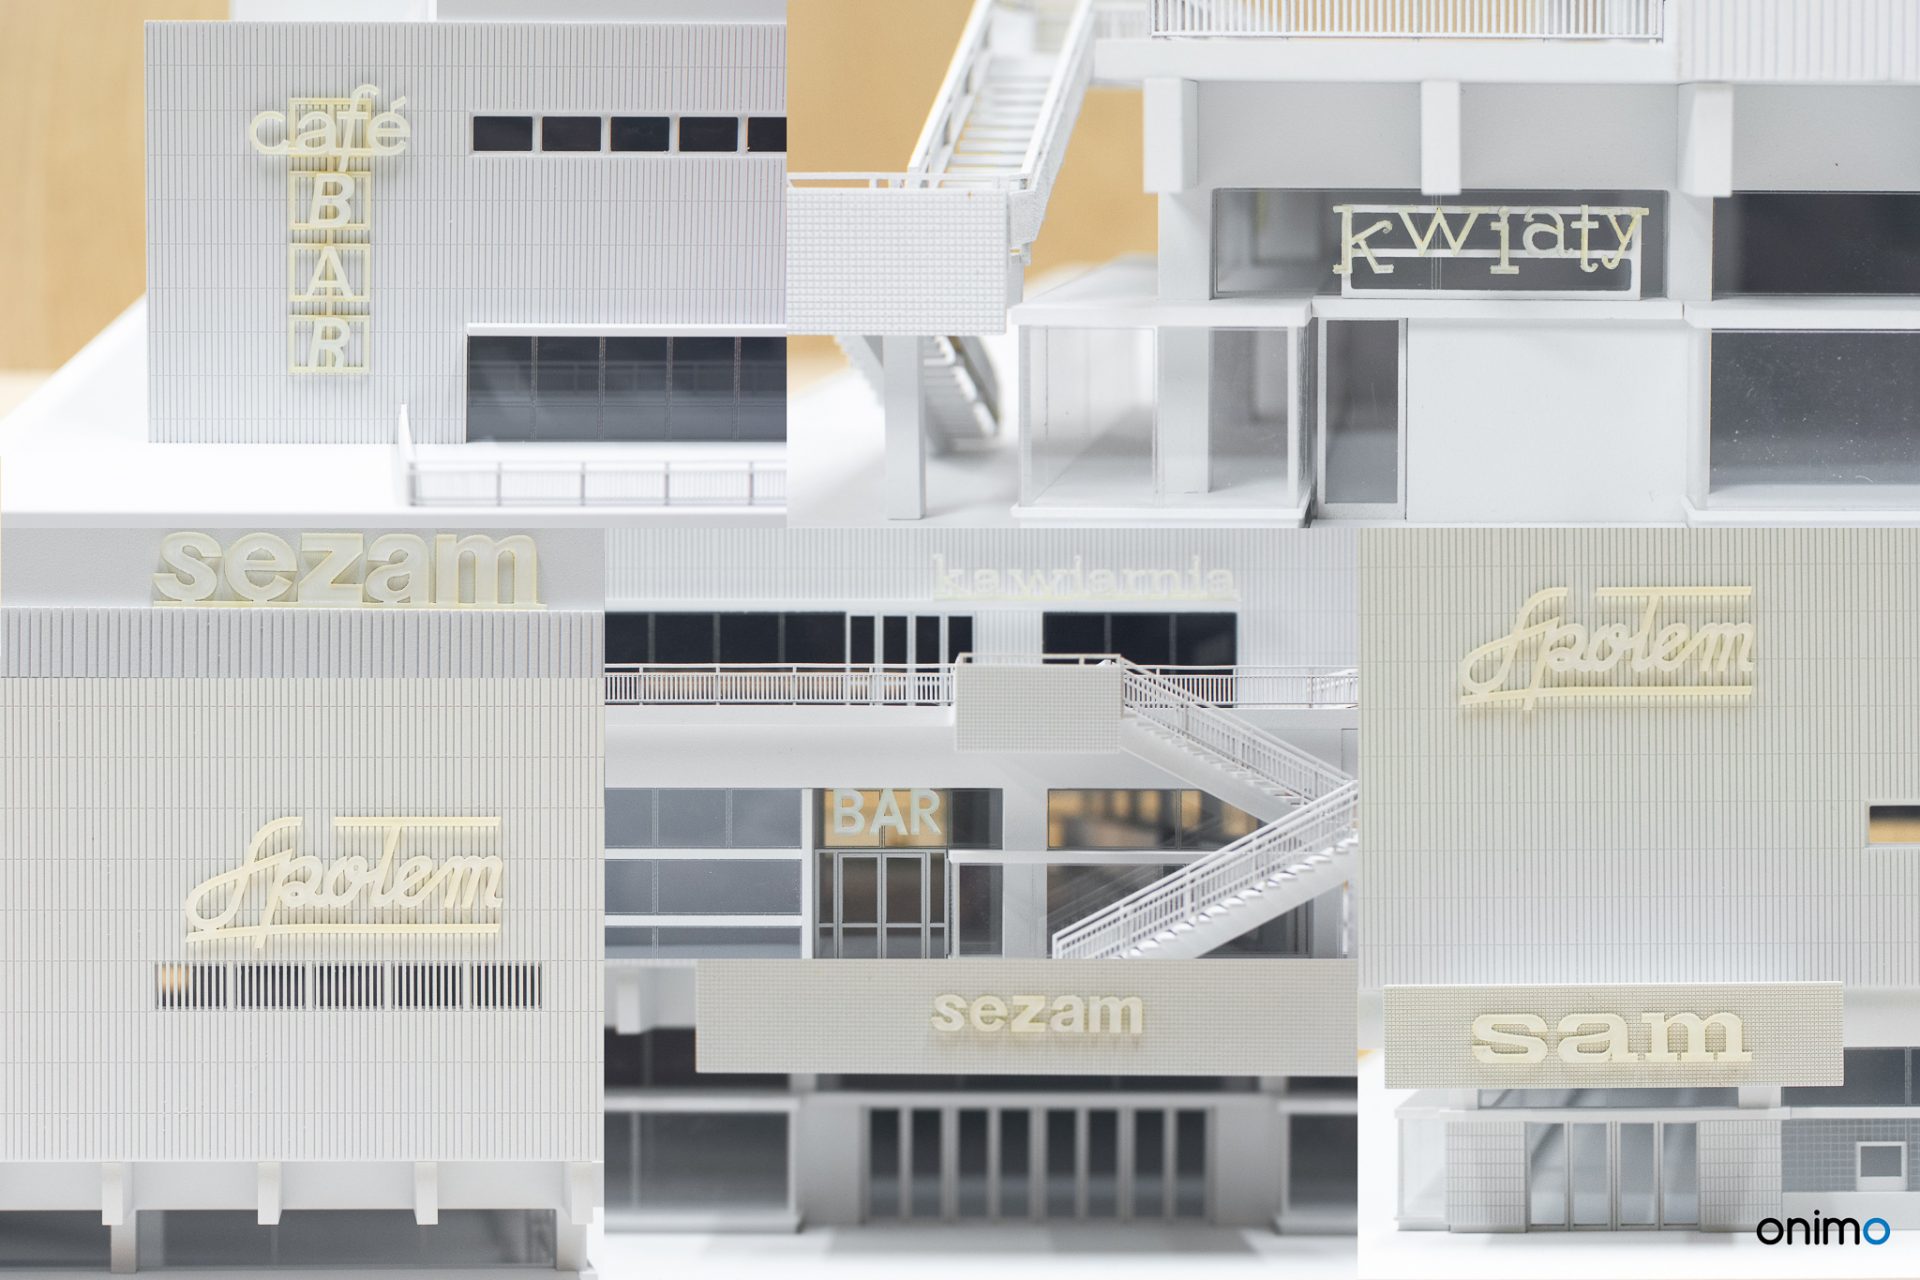 SEZAM | EASTERN WALL | Onimo Architectural models | Building models